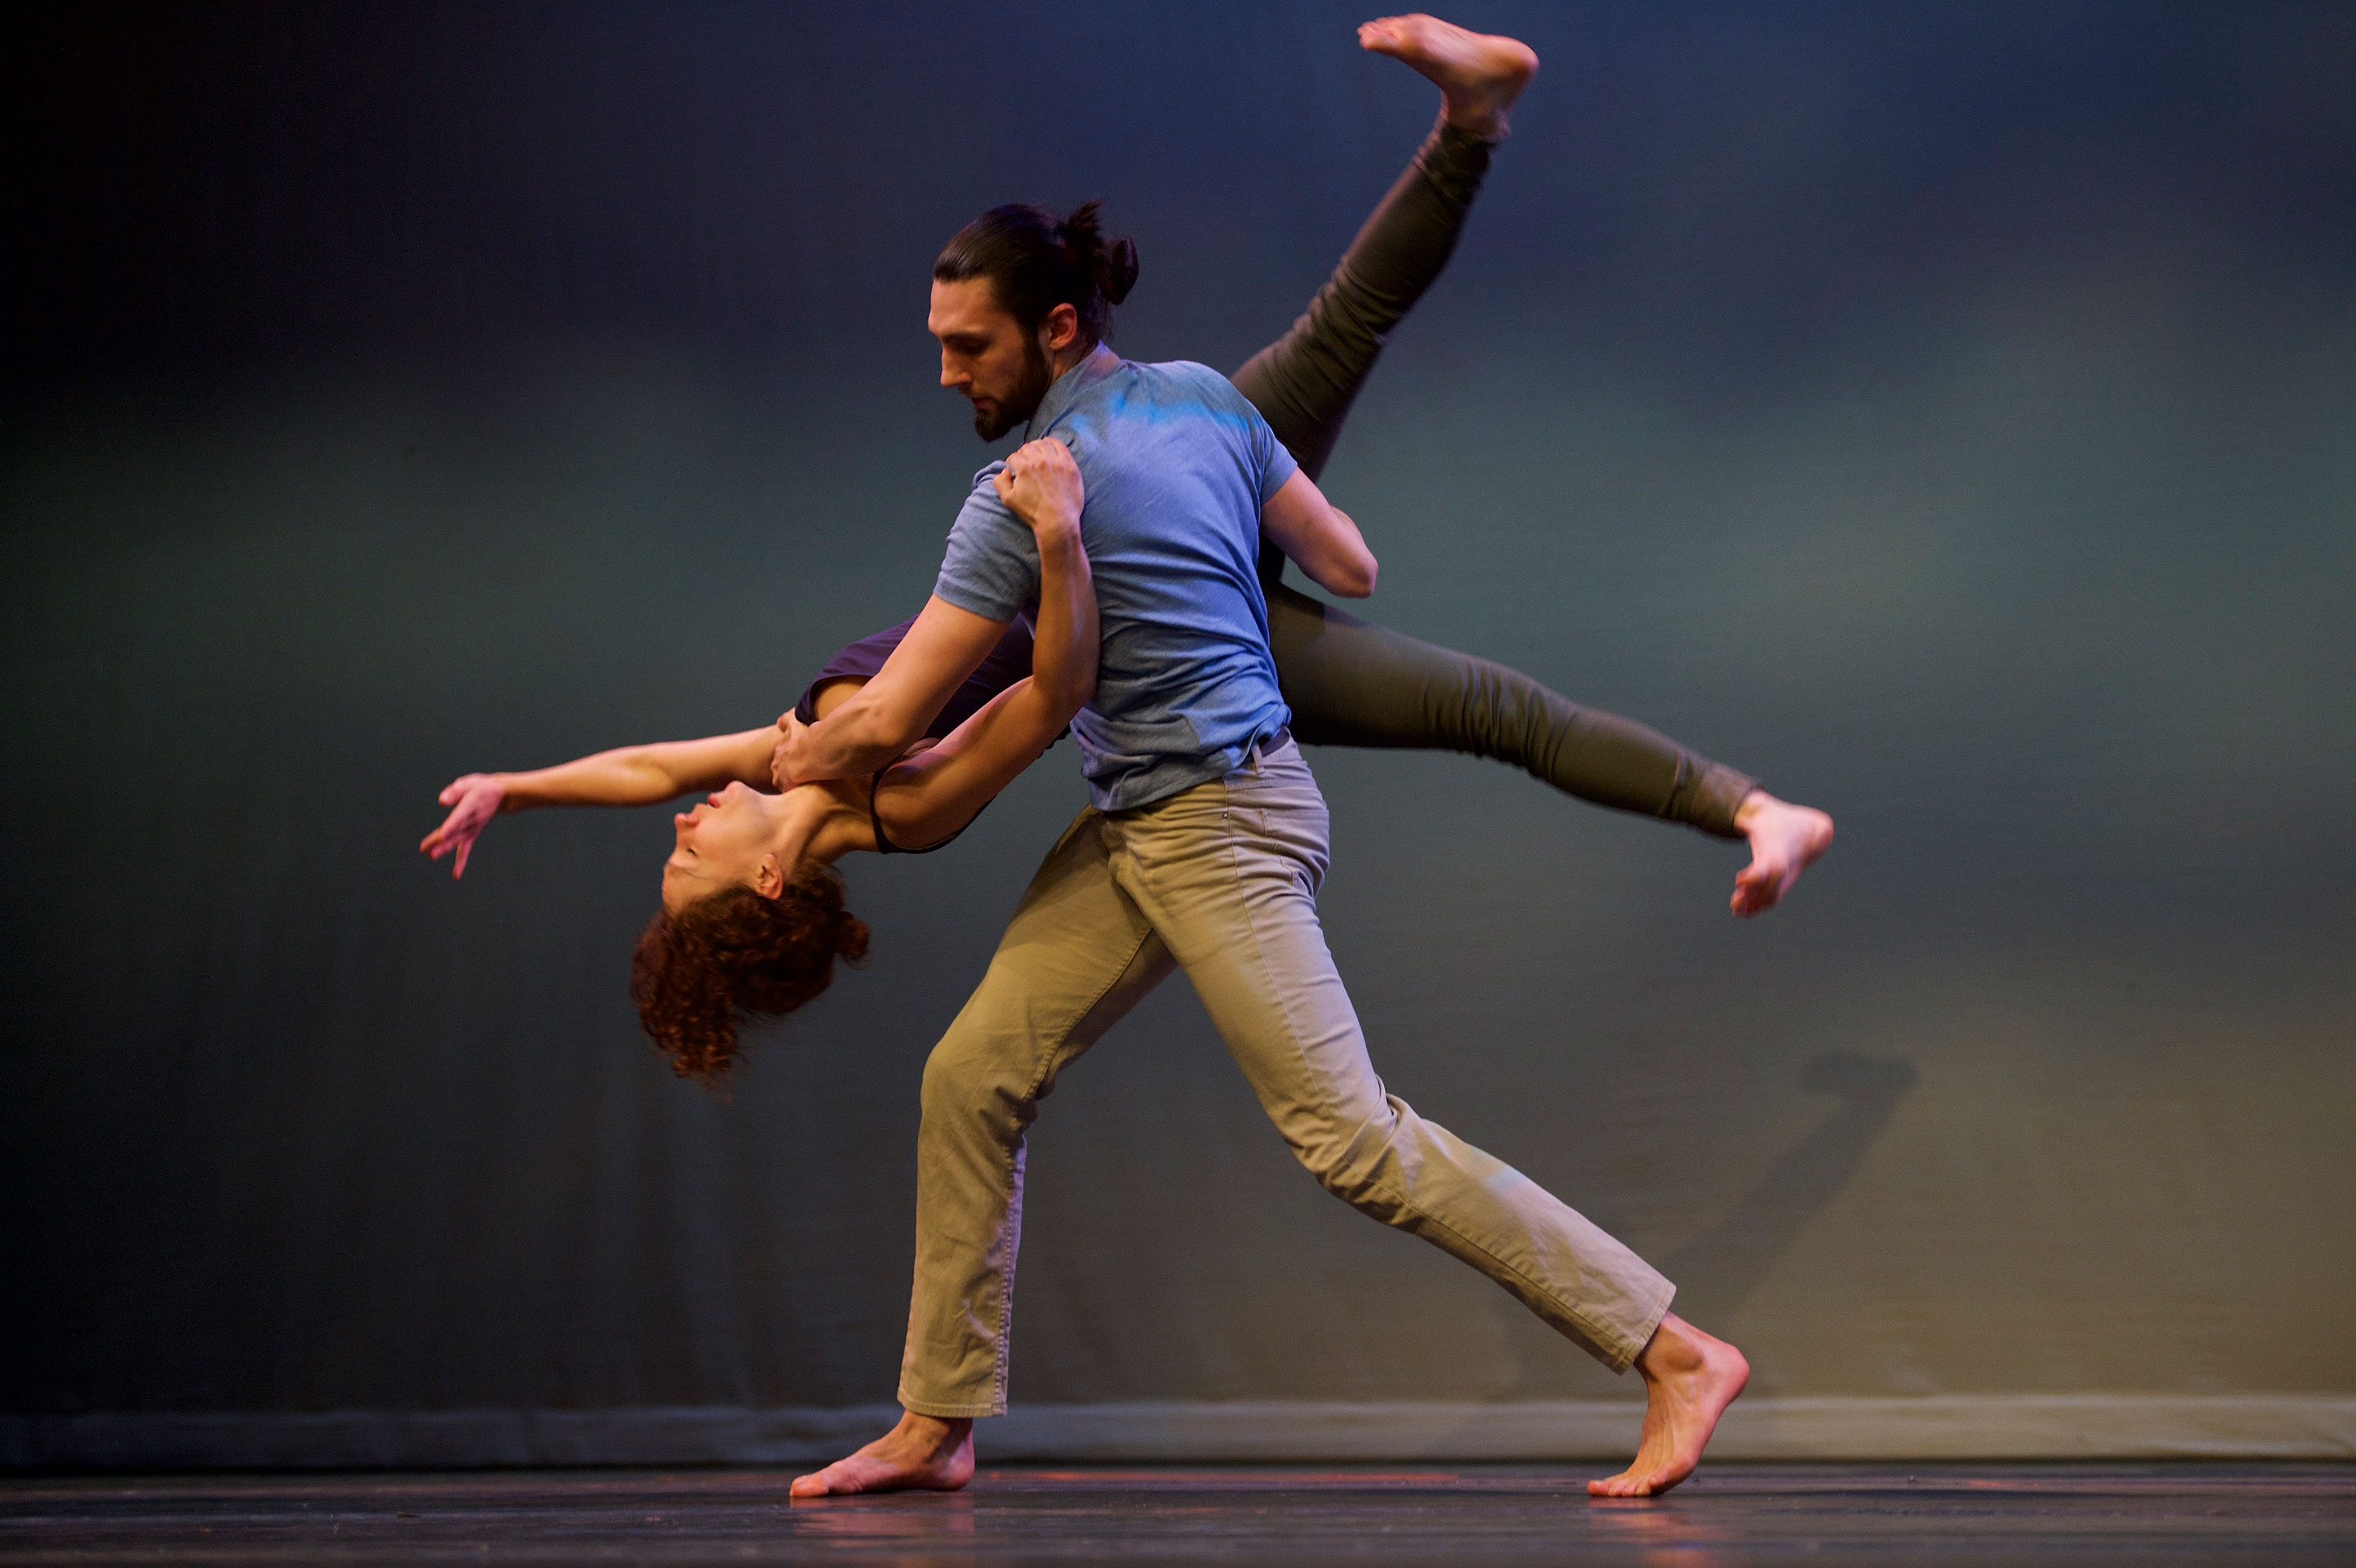 push/FOLD's artistic director Samuel Hobbs performs an acrobatic lift with dancer Jessica Evans in Vancouver, Washington | Photography: Troy Wayrynen